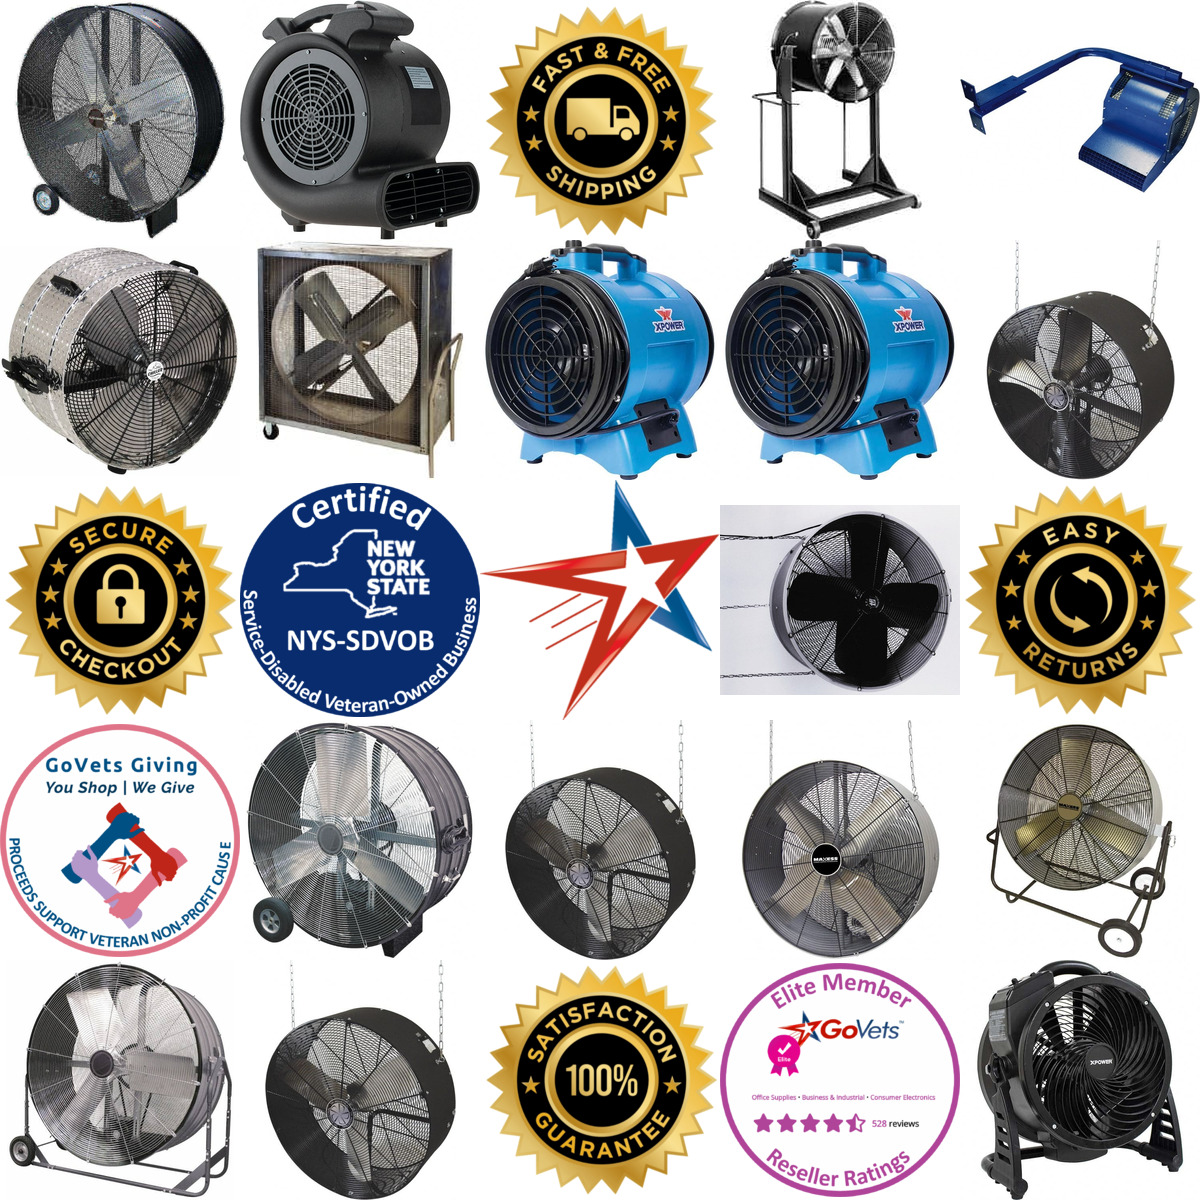 A selection of Blower Fans and Coolers products on GoVets